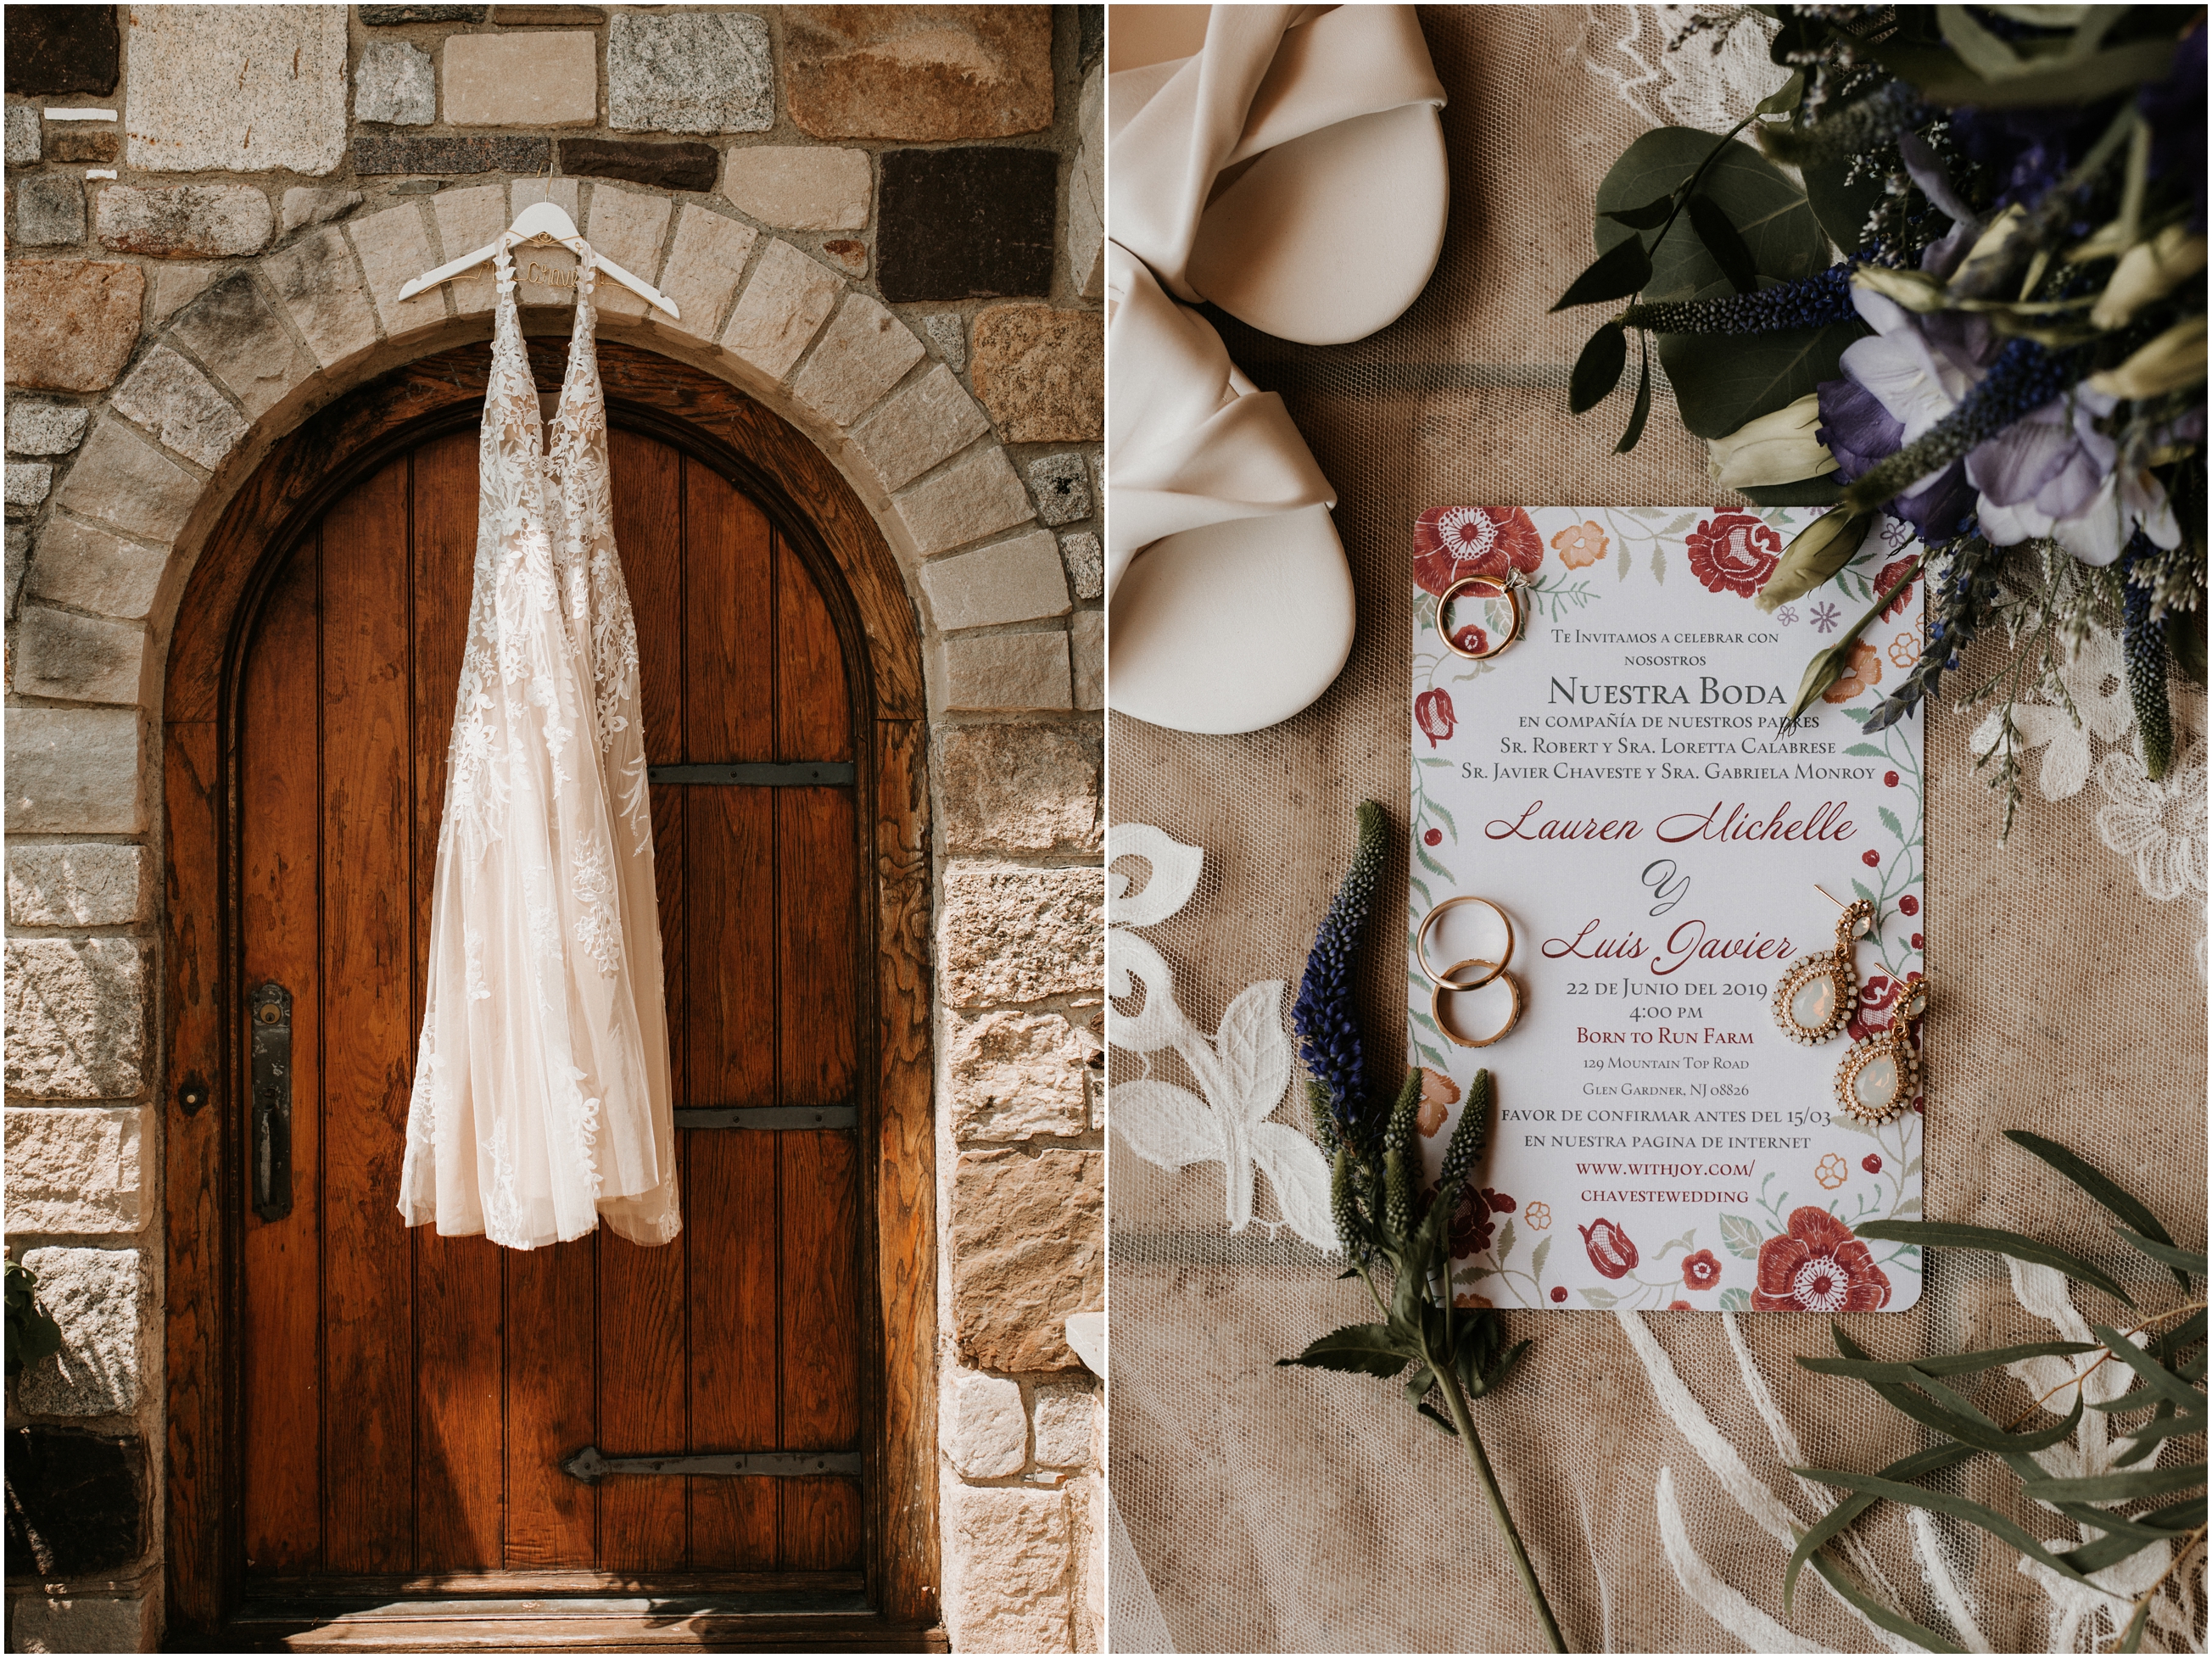 wedding dress hanging in doorway and flat lay of invitation